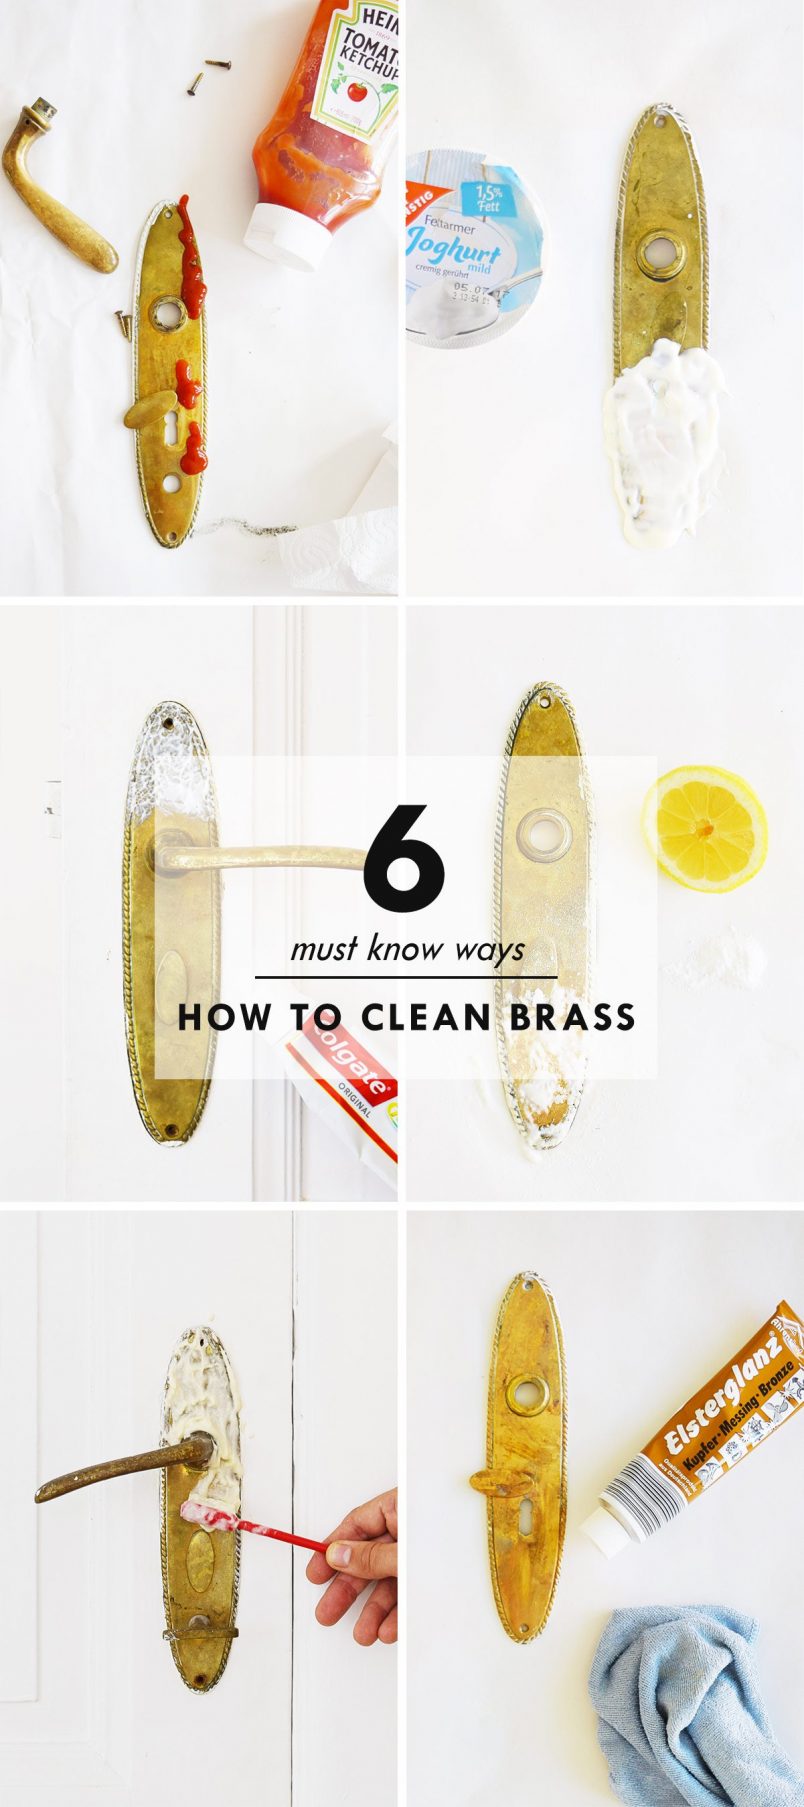 HOW TO CLEAN BRASS